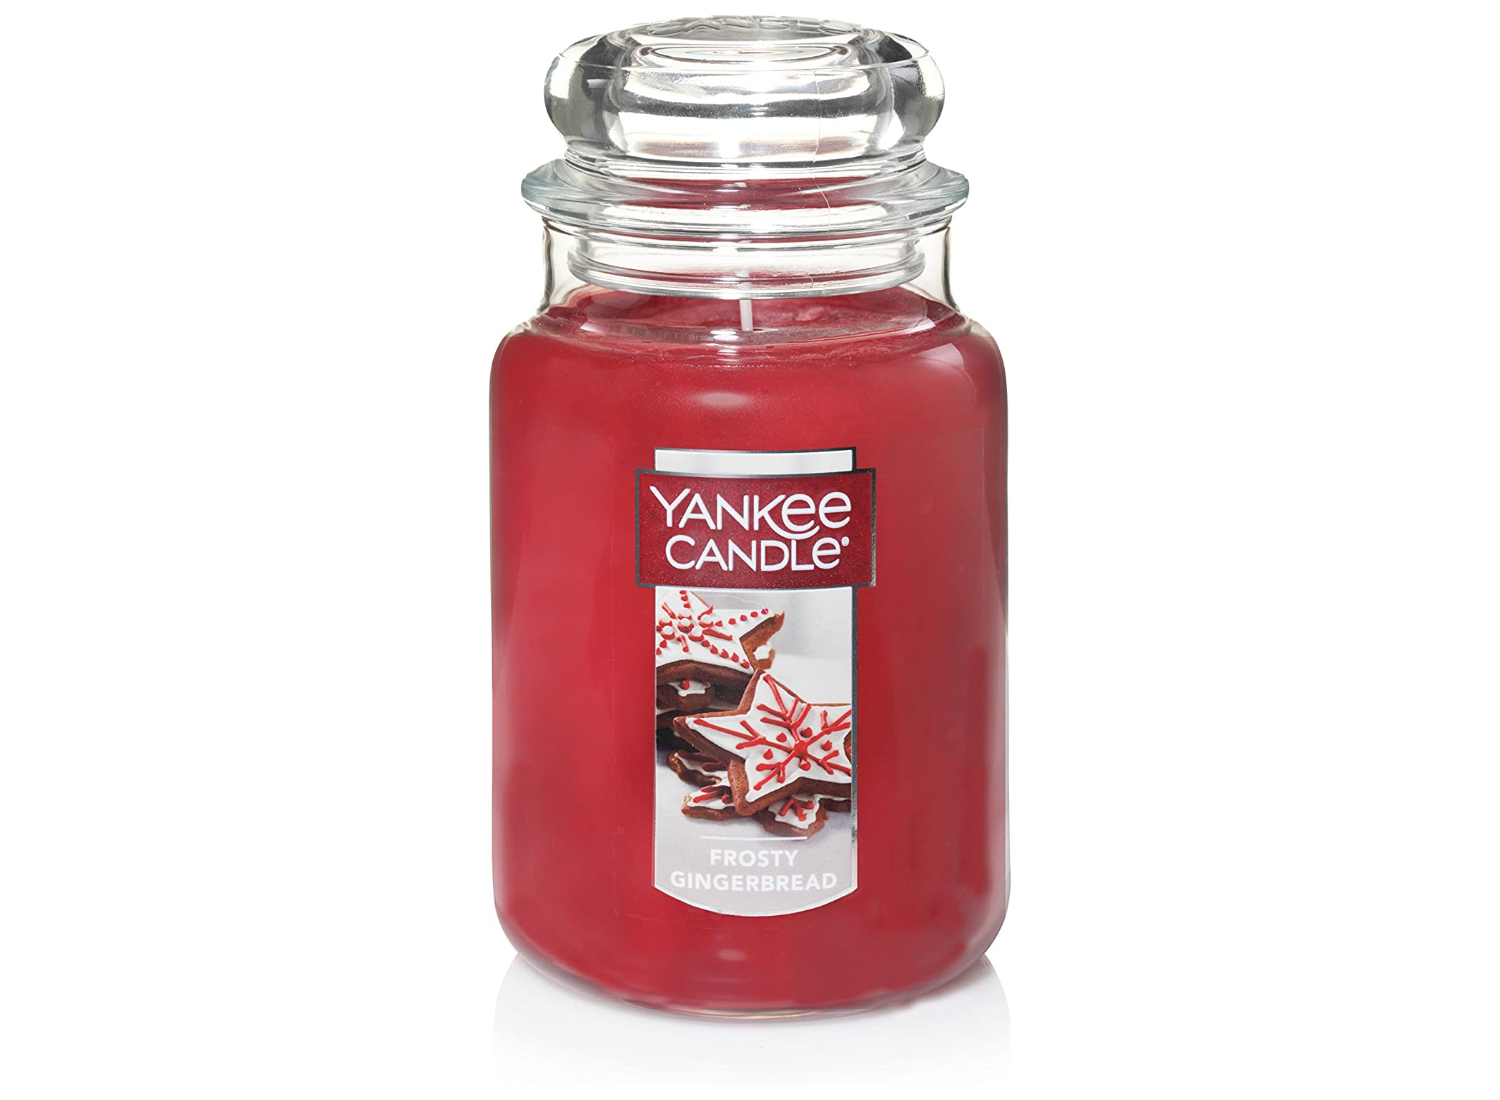 A Frosty Gingerbread Yankee Candle.